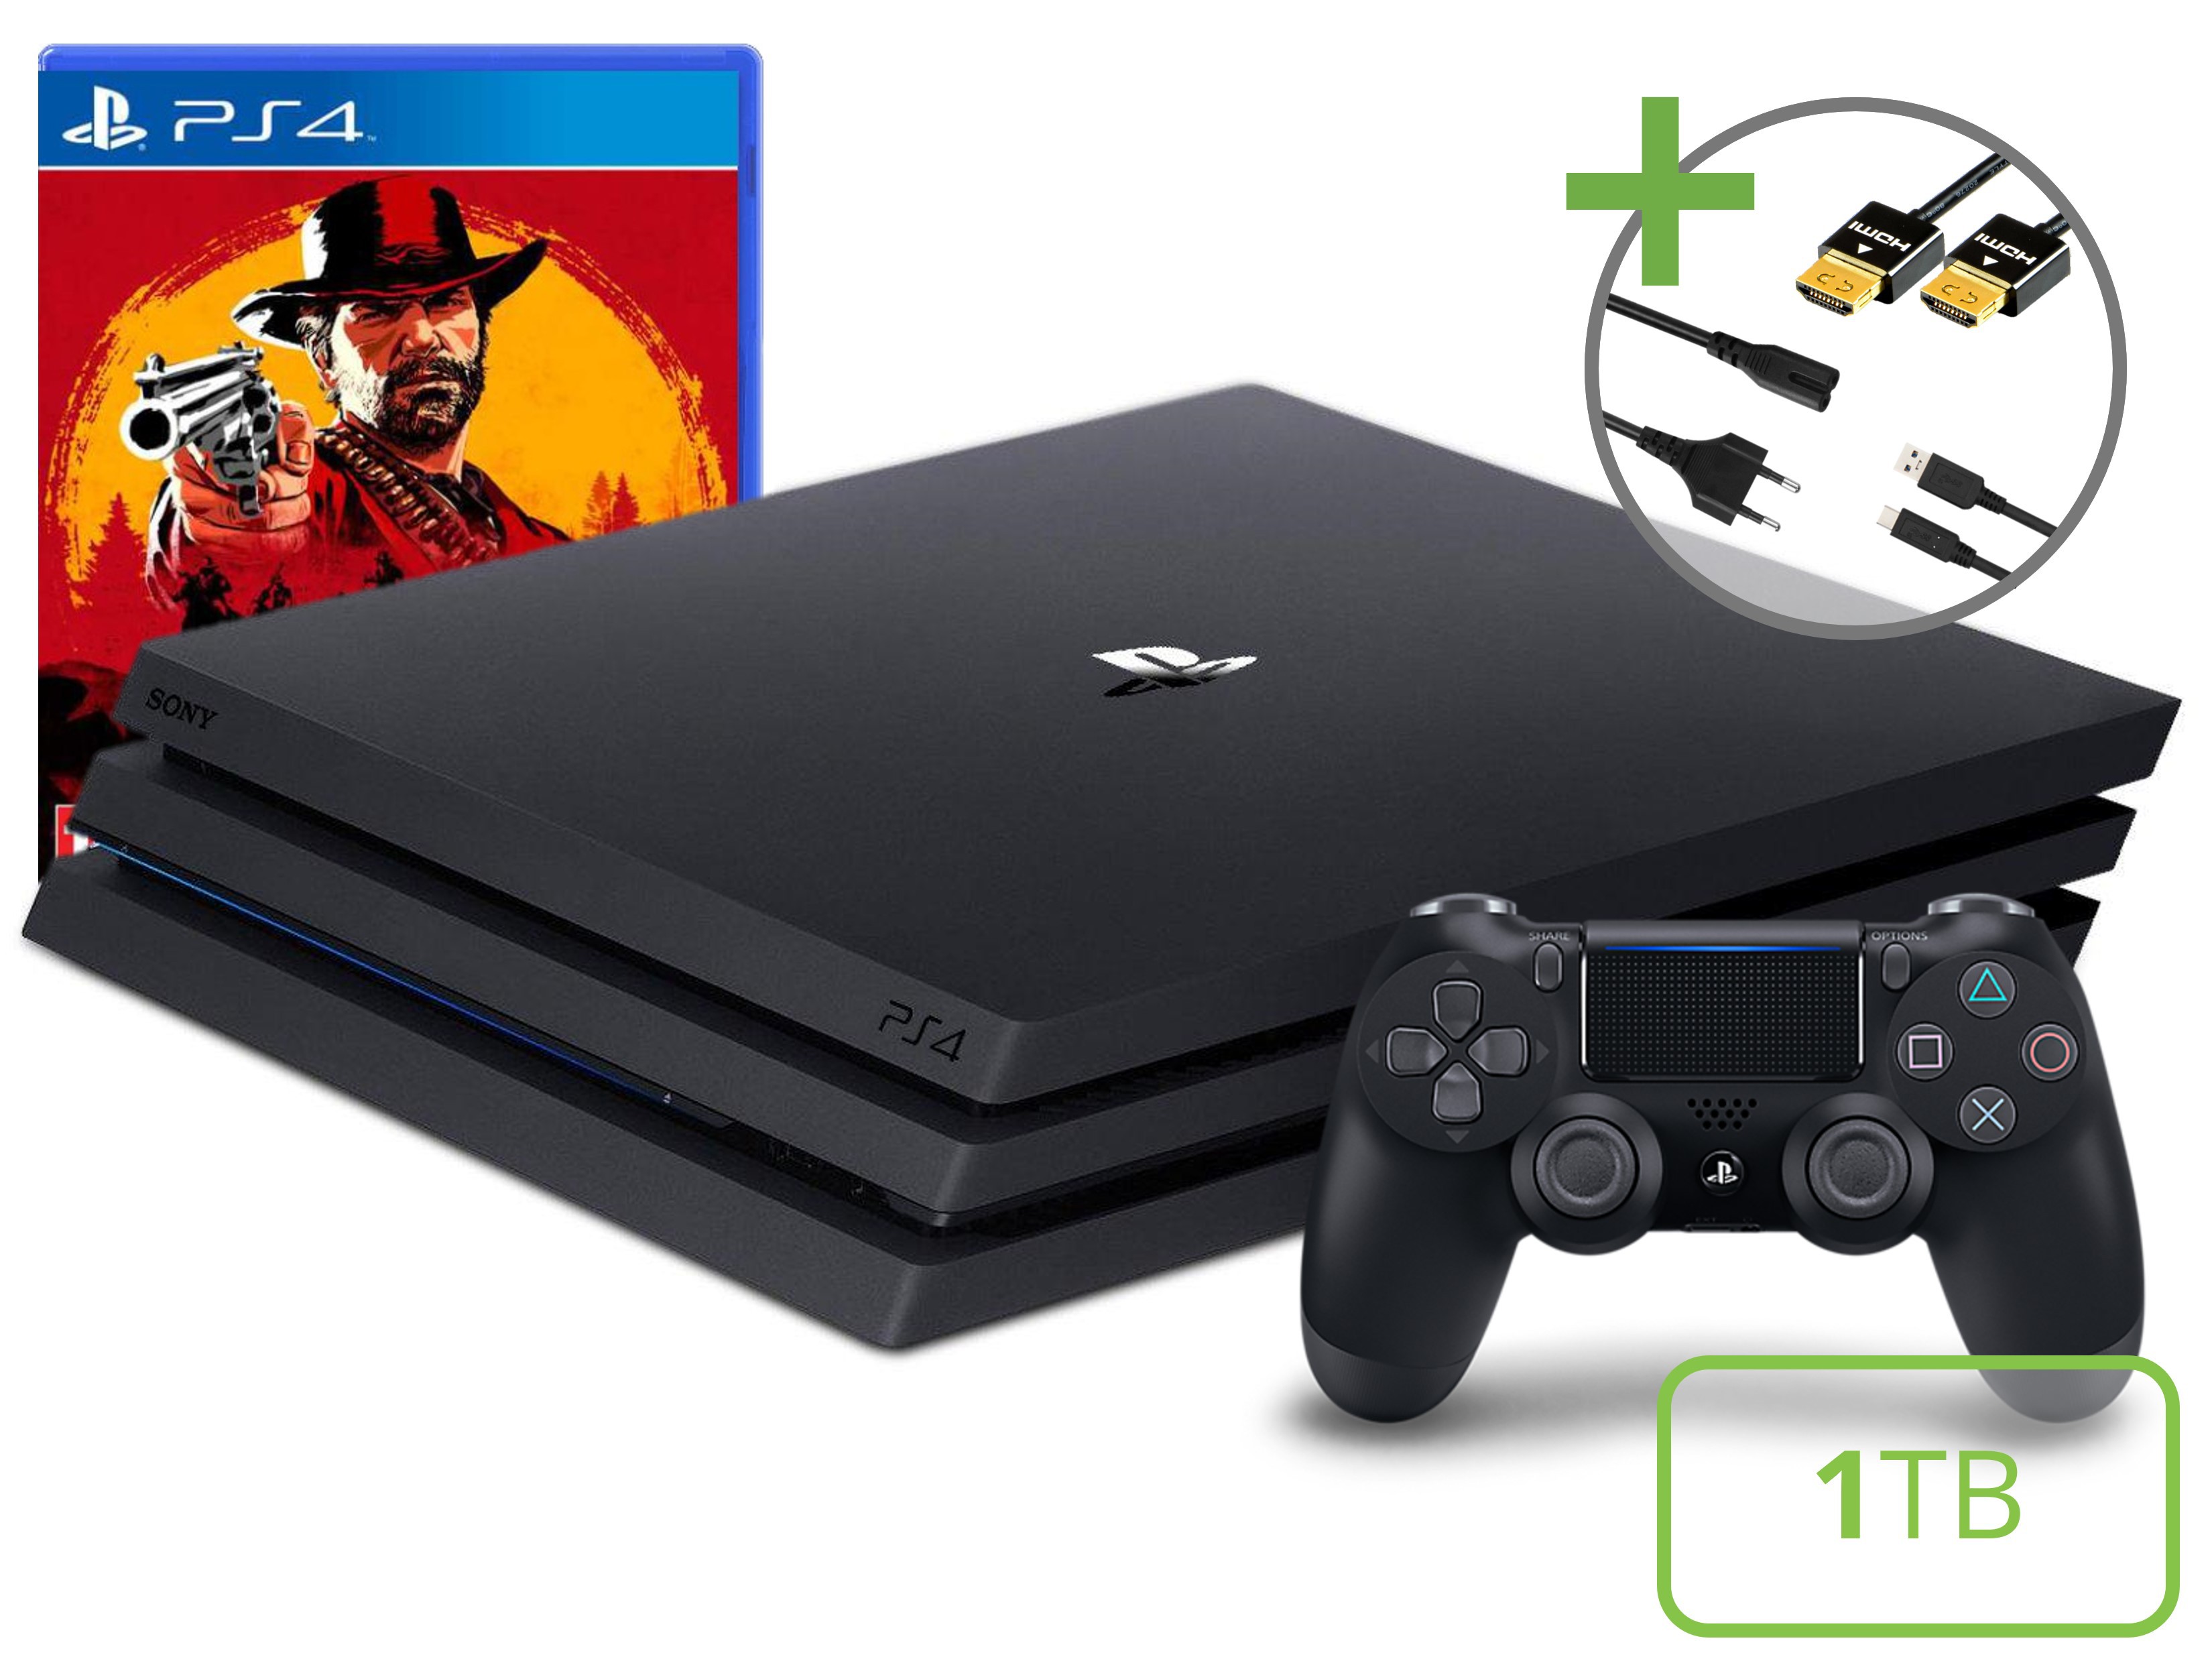 Sony PlayStation 4 Pro Starter Pack - 1TB Red Dead Redemption 2 Edition Kopen | Playstation 4 Hardware